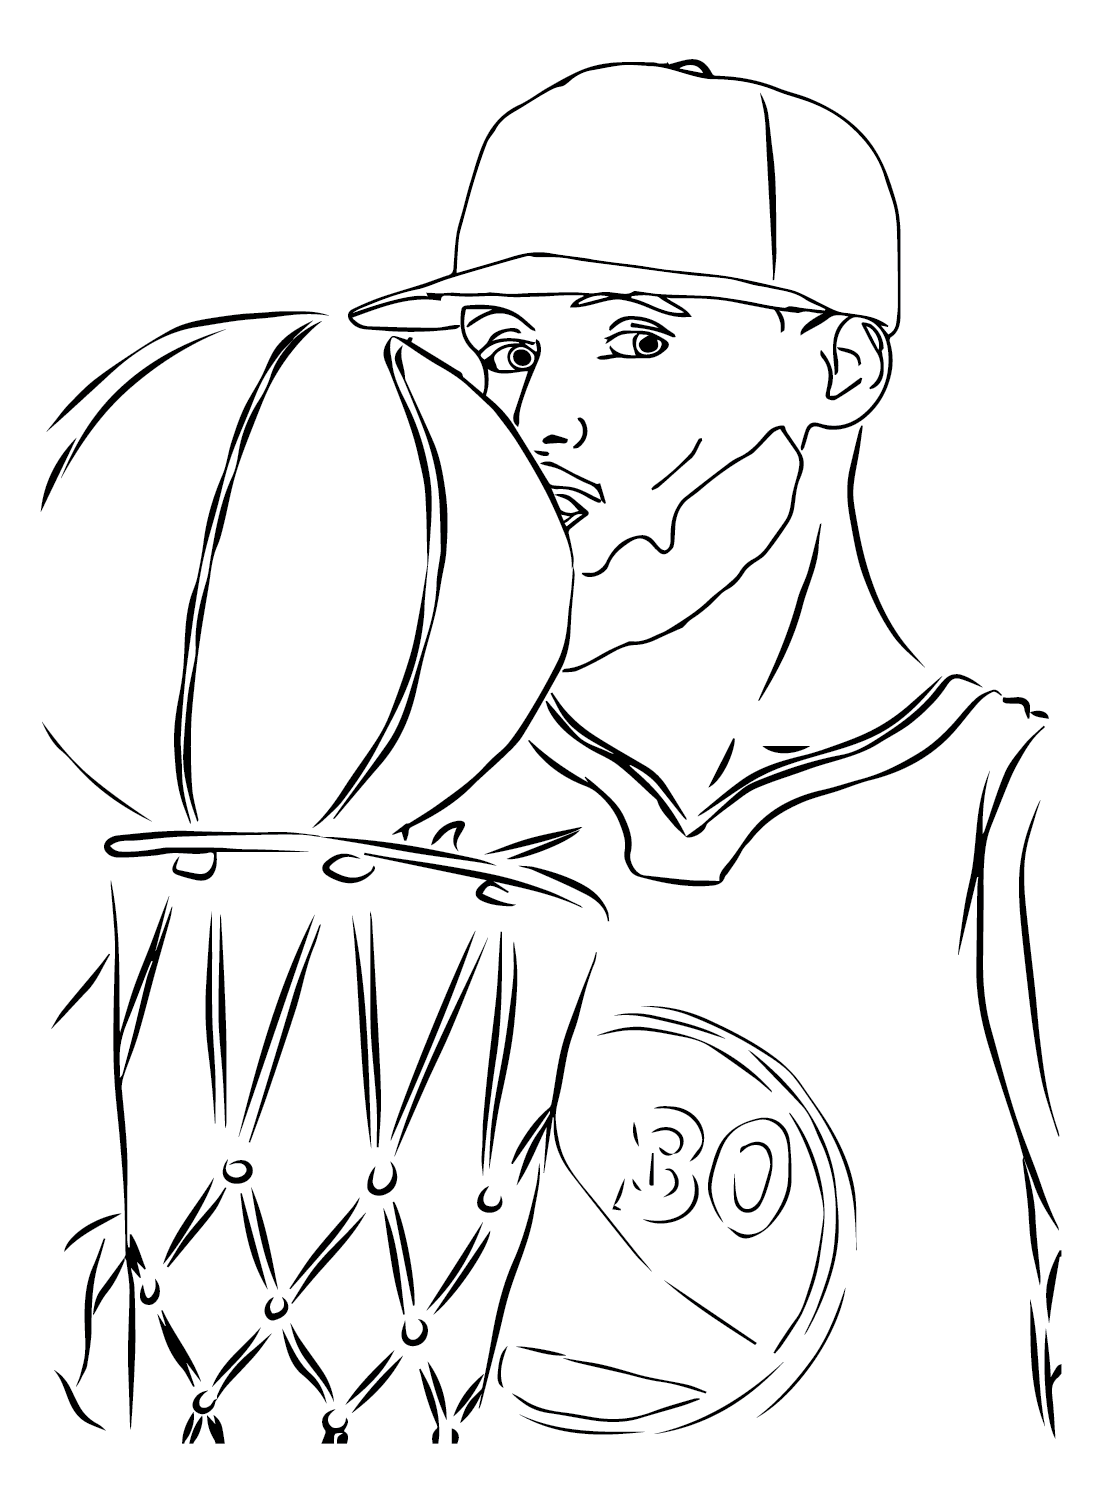 Stephen curry images coloring page